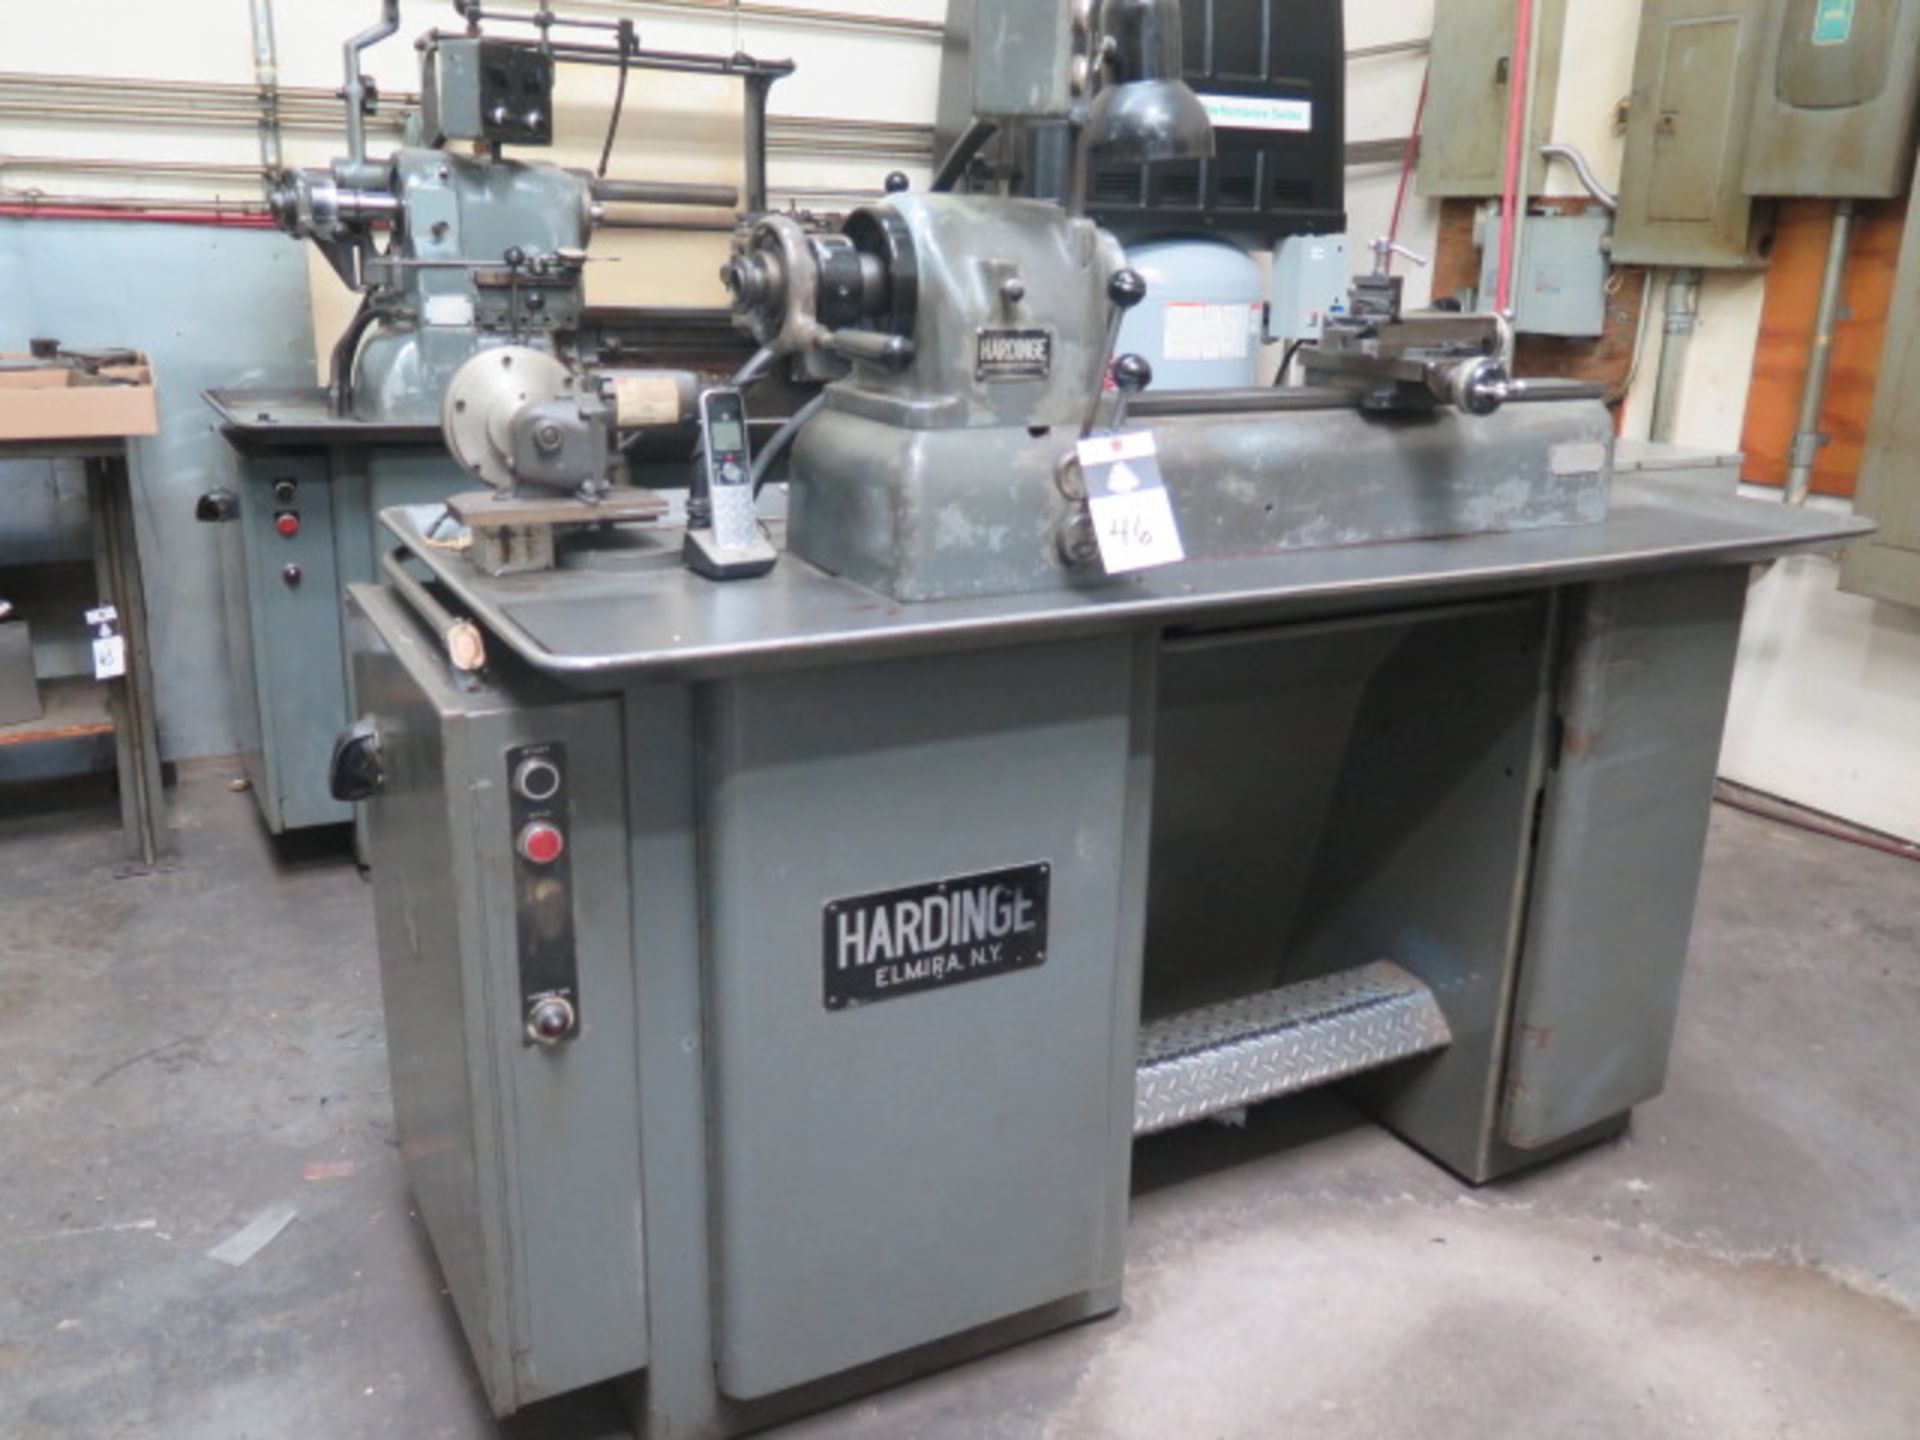 Hardinge DV-59 Narrow Bed Second OP Lathe s/n DV-59-12187 w/ 250-2600 RPM, 5C Spindle, Compound - Image 2 of 8